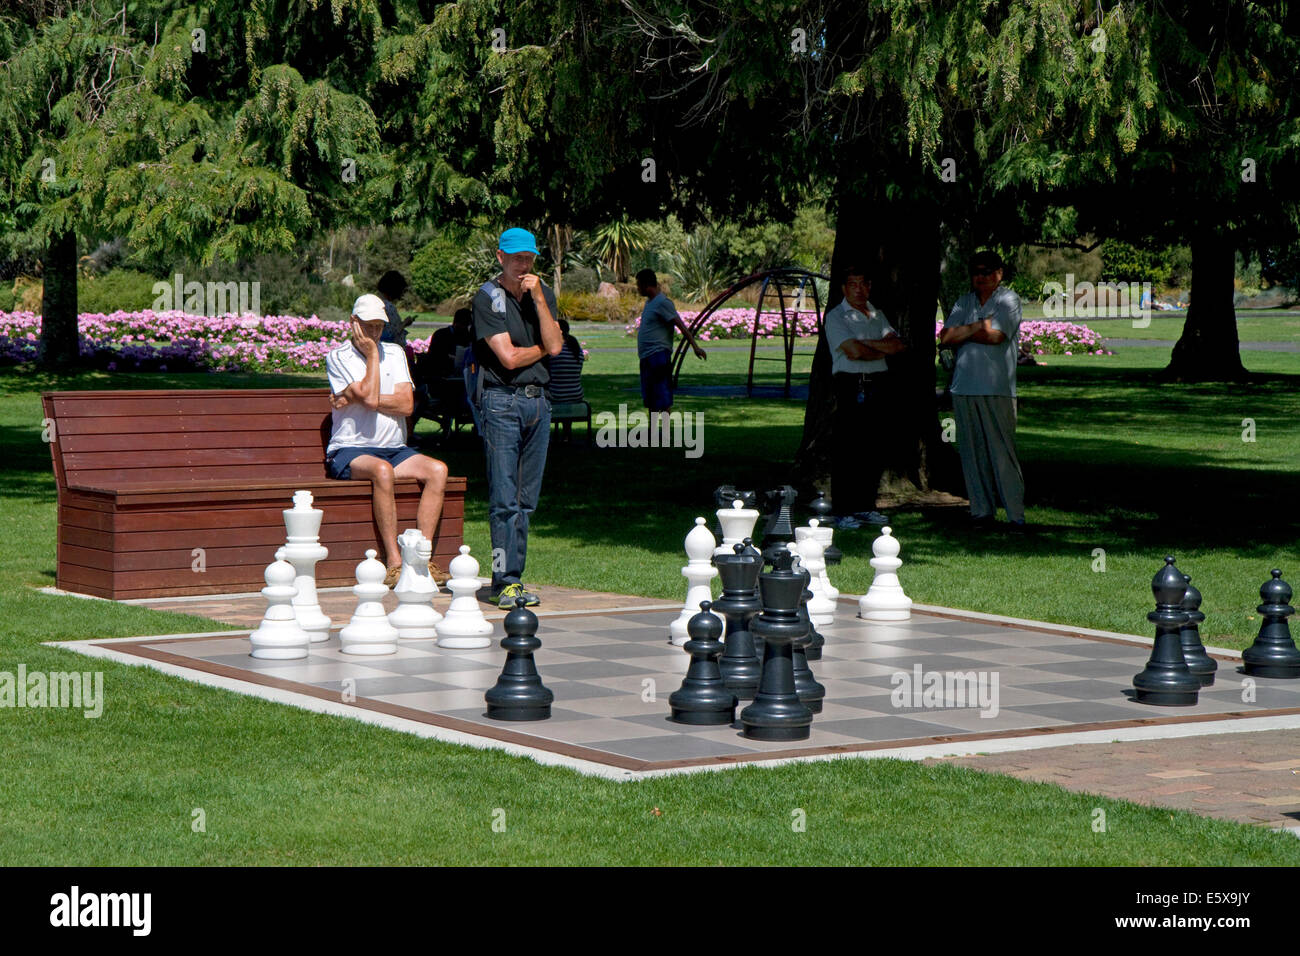 Outdoor chess game in a park at Taupo in the Waikato Region, North Island, New Zealand. Stock Photo